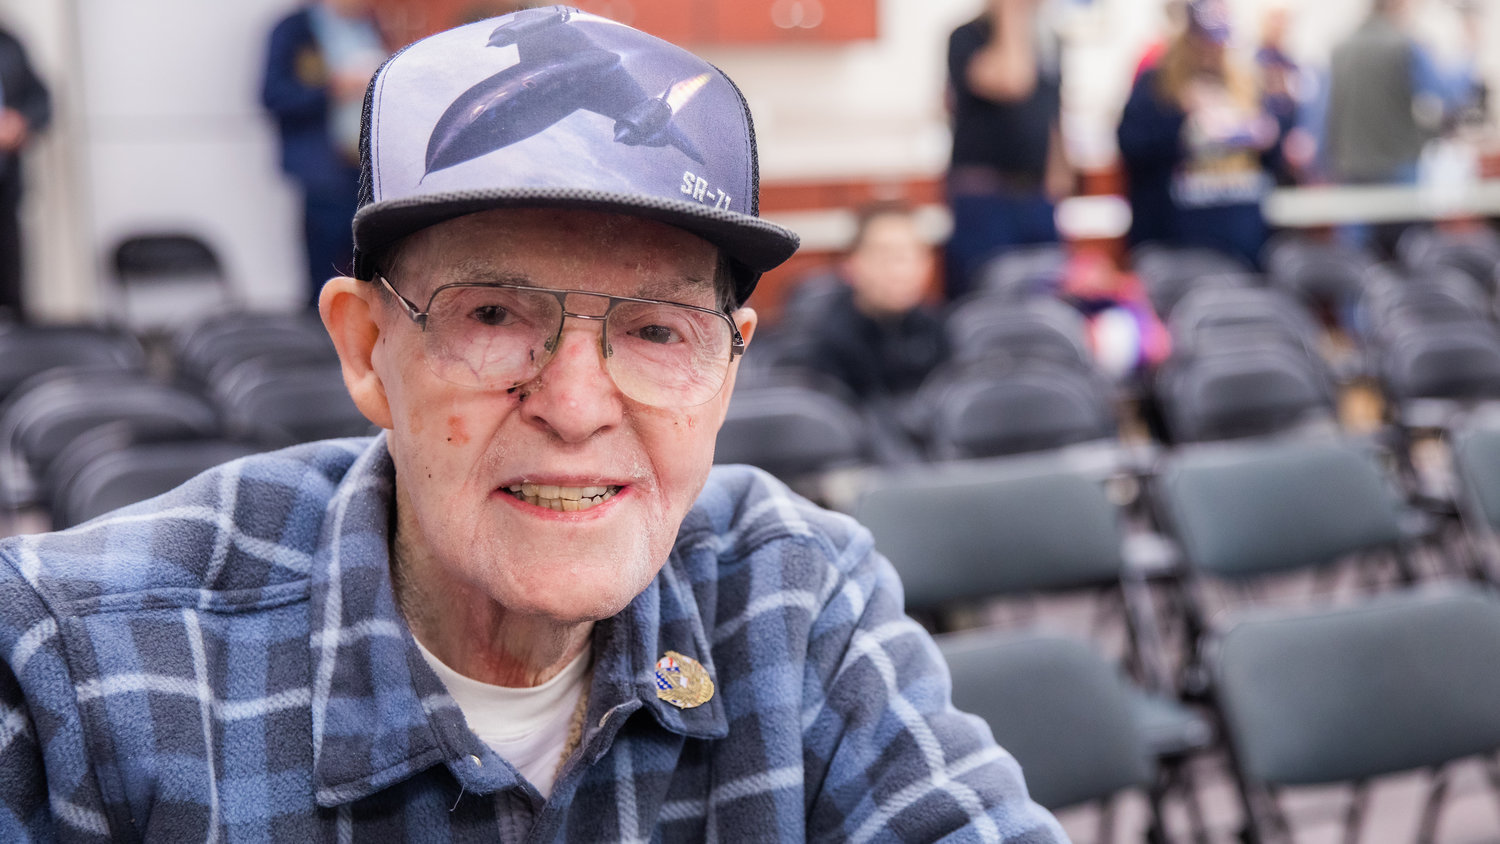 Ed Fund smiles for a photo on Veterans Day during the 25th anniversary of the Veterans Memorial Museum in Chehalis.